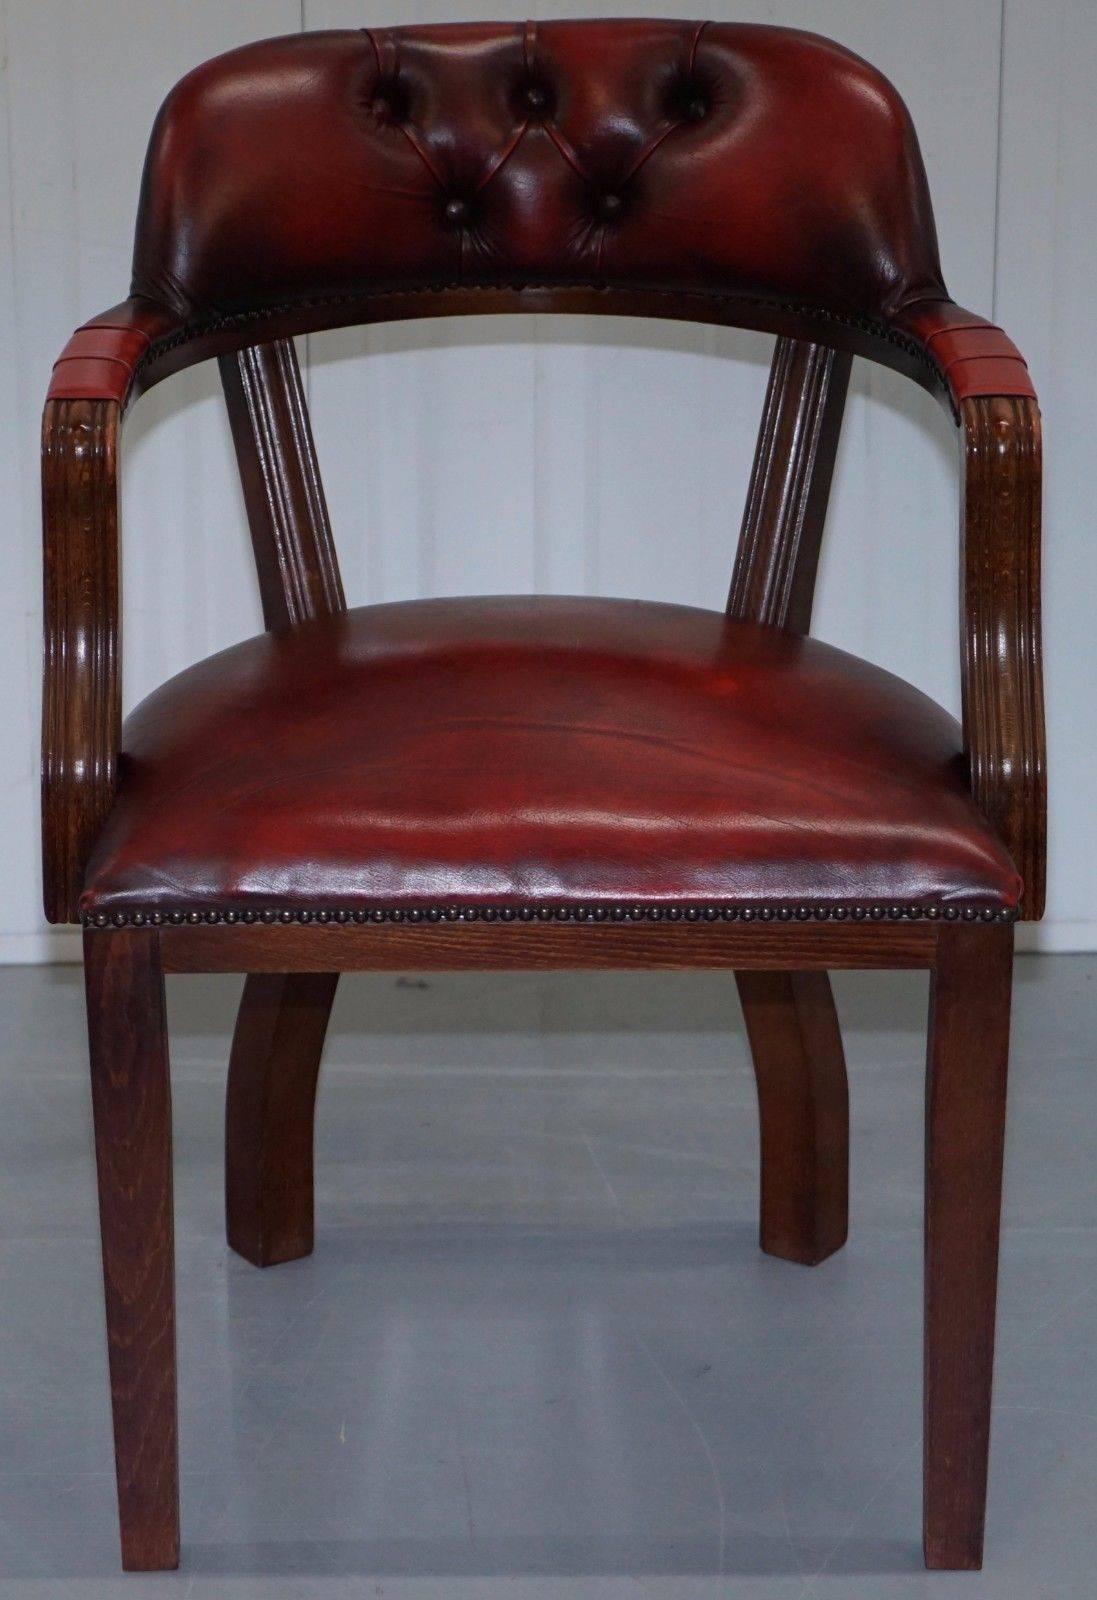 We are delighted to offer for sale this very nice aged oxblood leather Chesterfield court chair

Ideally suited for a desk or guest chair, we have deep cleaned hand condition waxed and hand polished it from top to bottom

 Dimensions

Height